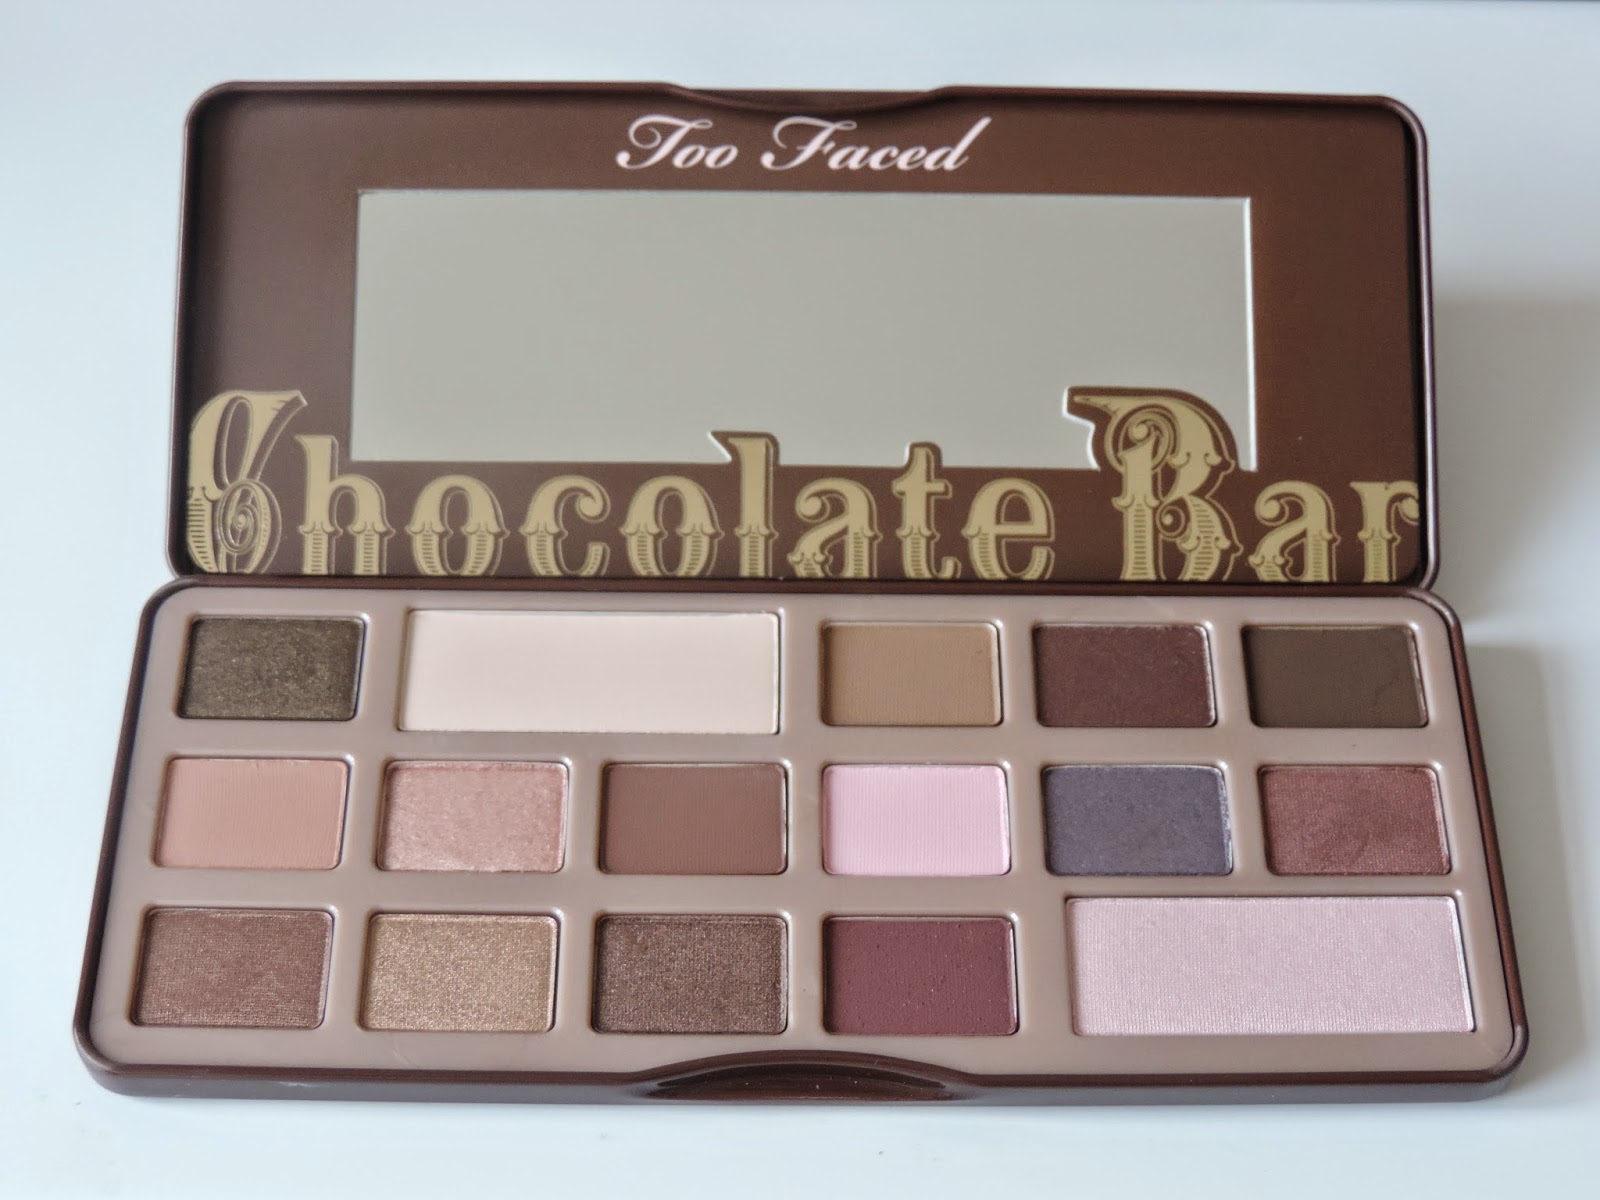 Leona's Looks Too Faced Chocolate Bar Palette Review